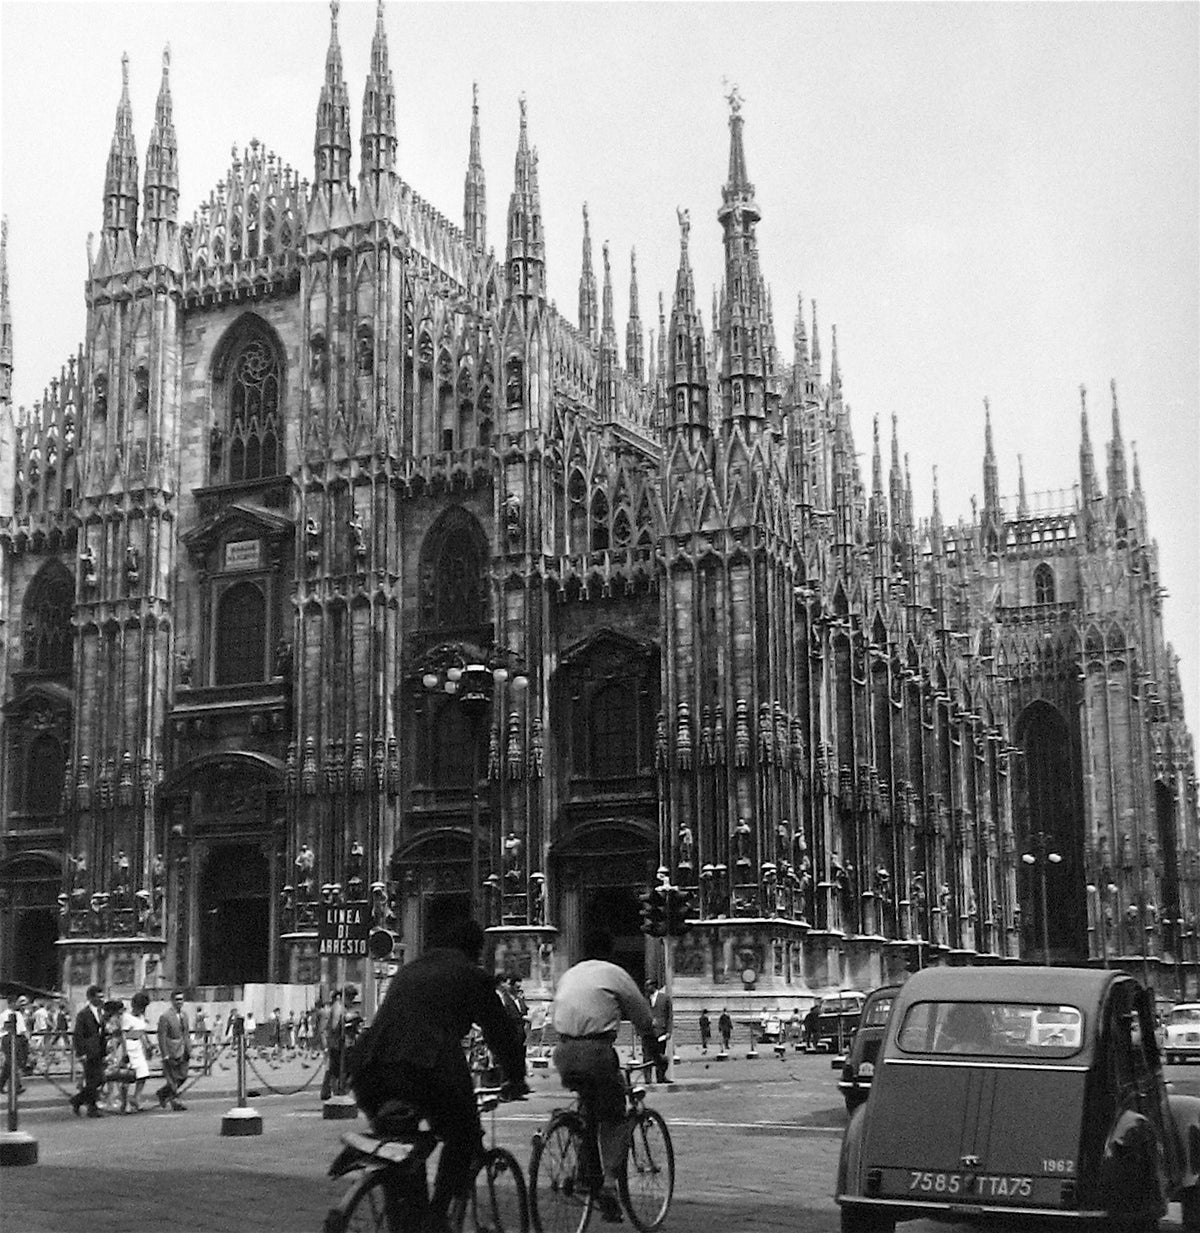 Gothic Cathedral in Milan, Italy&lt;br&gt;1960s Silver Gelatin Print&lt;br&gt;&lt;br&gt;#12121